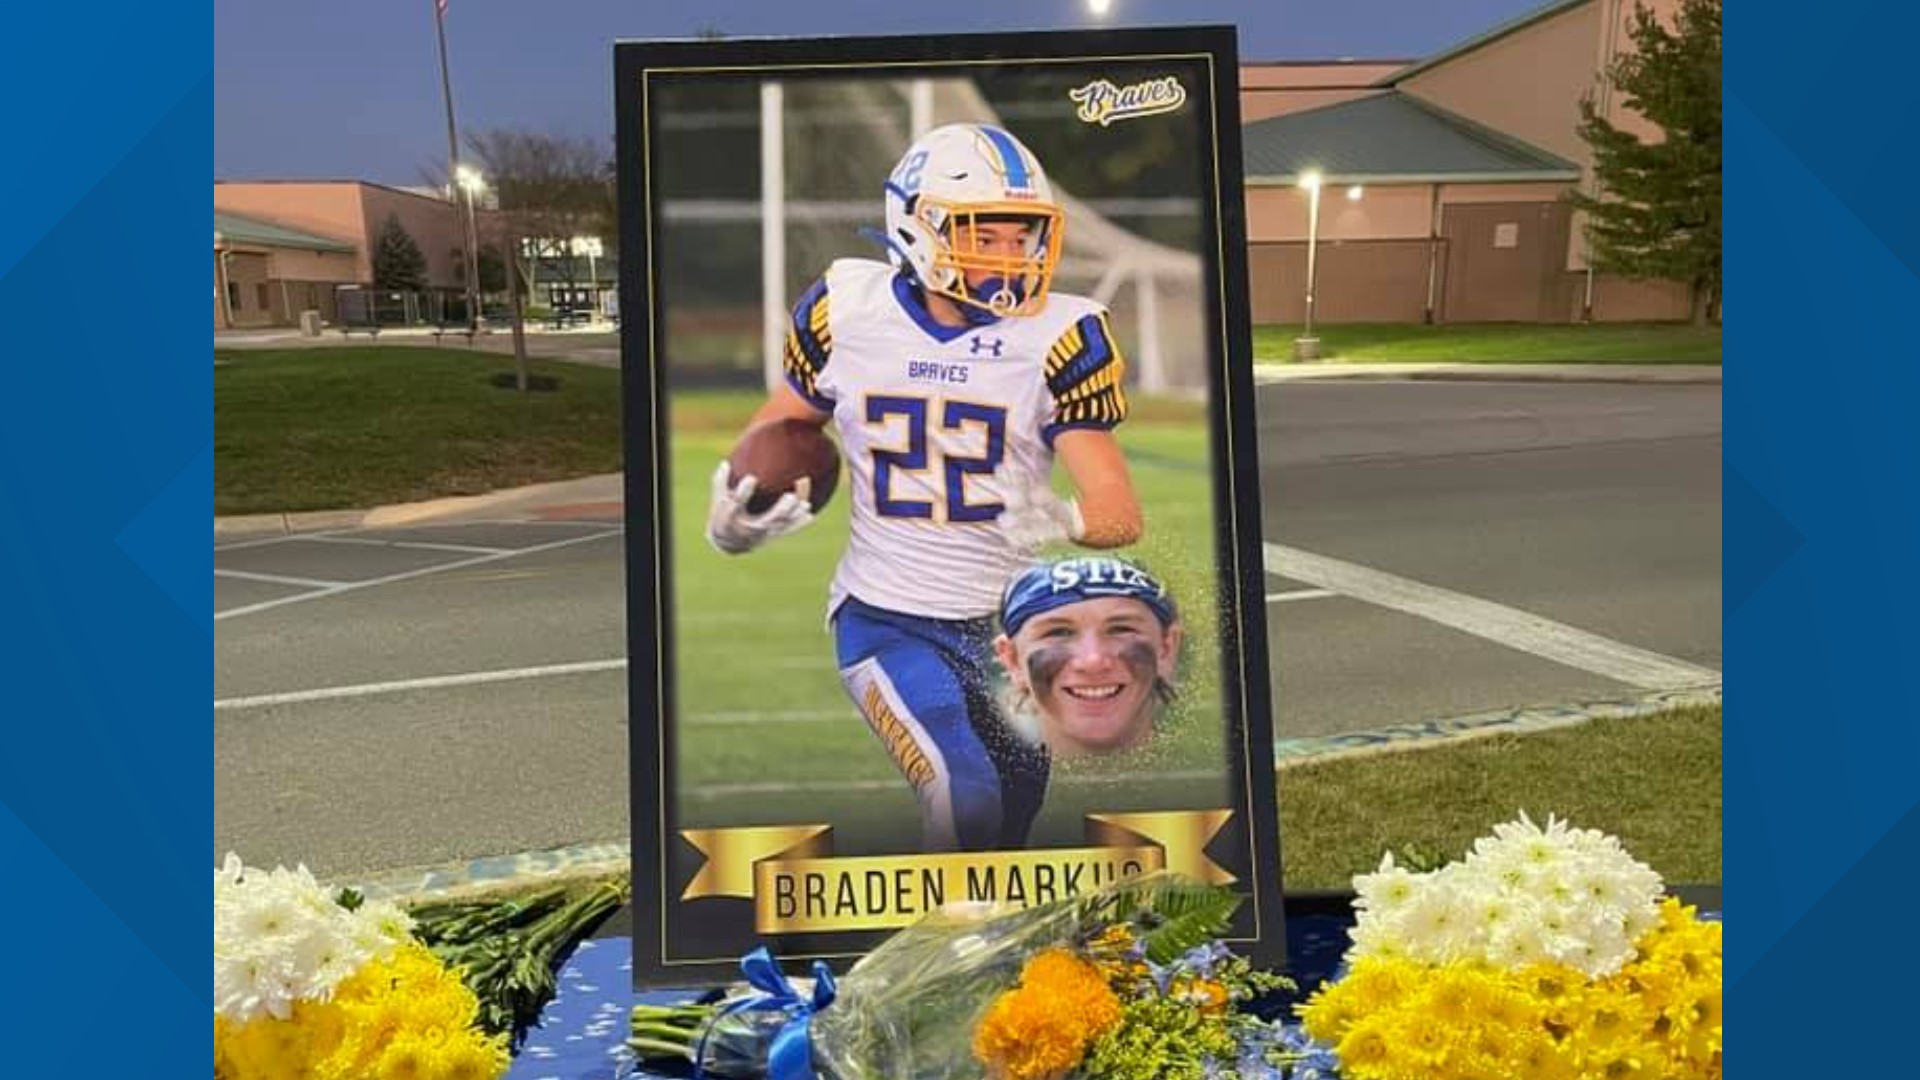 Braden Markus was the target of a sextortion scam in Oct. 2021. Twenty-seven minutes after the online transaction began, the teen took his own life.